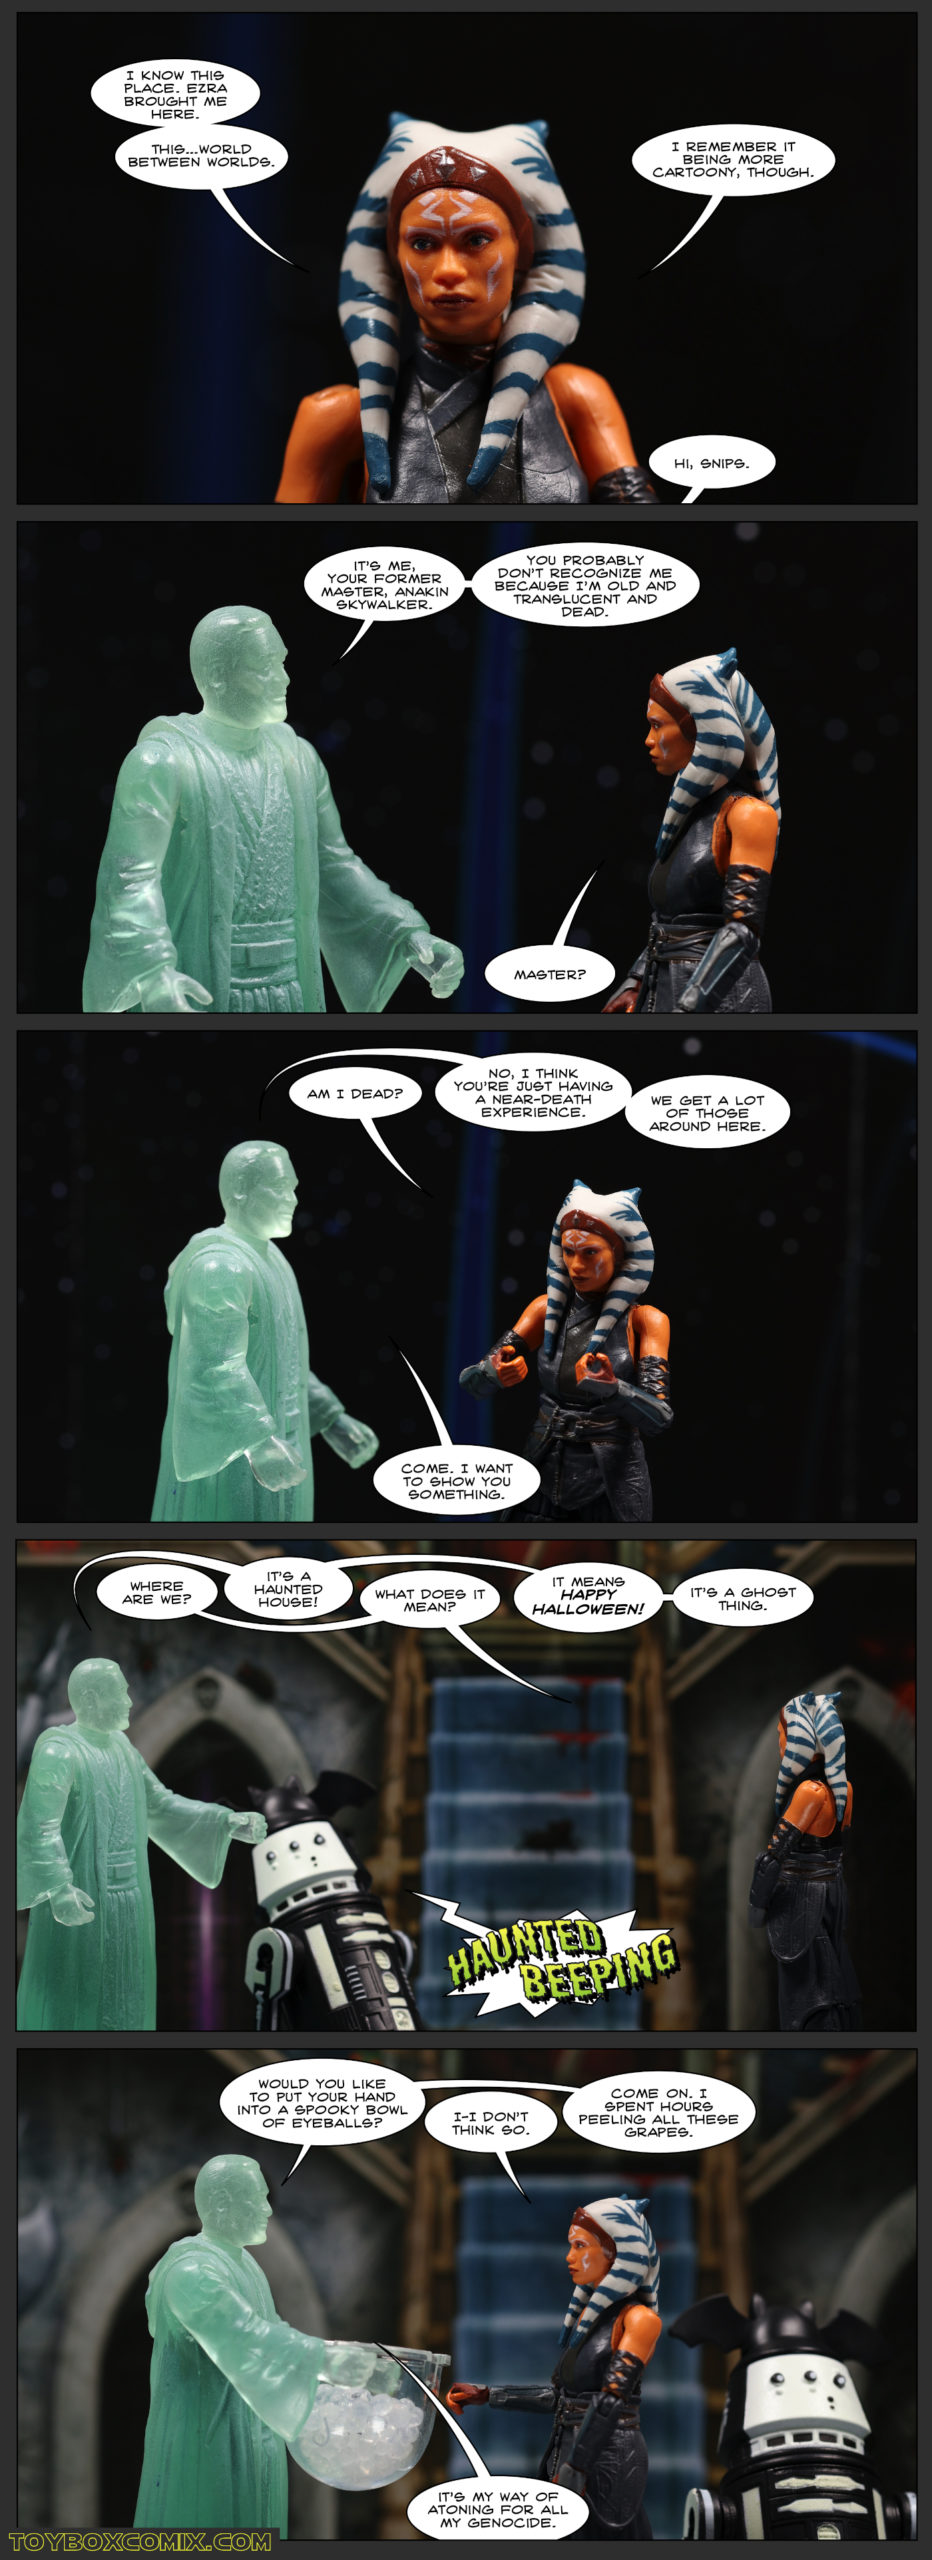 Panel 1: Ahsoka: “I know this place. Ezra brought me here. This…world between worlds. I remember it being more cartoony, though.” Off-panel: “Hi, Snips.” 2: Ghost of Anakin: “It’s me, your former master, Anakin Skywalker. You probably don’t recognize me because I’m old and translucent and dead.” Ahsoka: “Master?” 3: Ahsoka: “Am I dead?” Anakin: “No, I think you’re just having a near-death experience. We get a lot of those around here. Come. I want to show you something.” 4: Ahsoka: “Where are we?” Anakin: “It’s a haunted house!” Ahsoka: “What does it mean?” Anakin: “It means Happy Halloween! It’s a ghost thing.” Skeleton-droid R5-B0019: (Haunted Beeping) 5: Anakin, holding a bowl: “Would you like to put your hand into a spooky bowl of eyeballs?” Ahsoka: “I-I don’t think so.” Anakin: “Come on. I spent hours peeling all these grapes. It’s my way of atoning for all my genocide.”